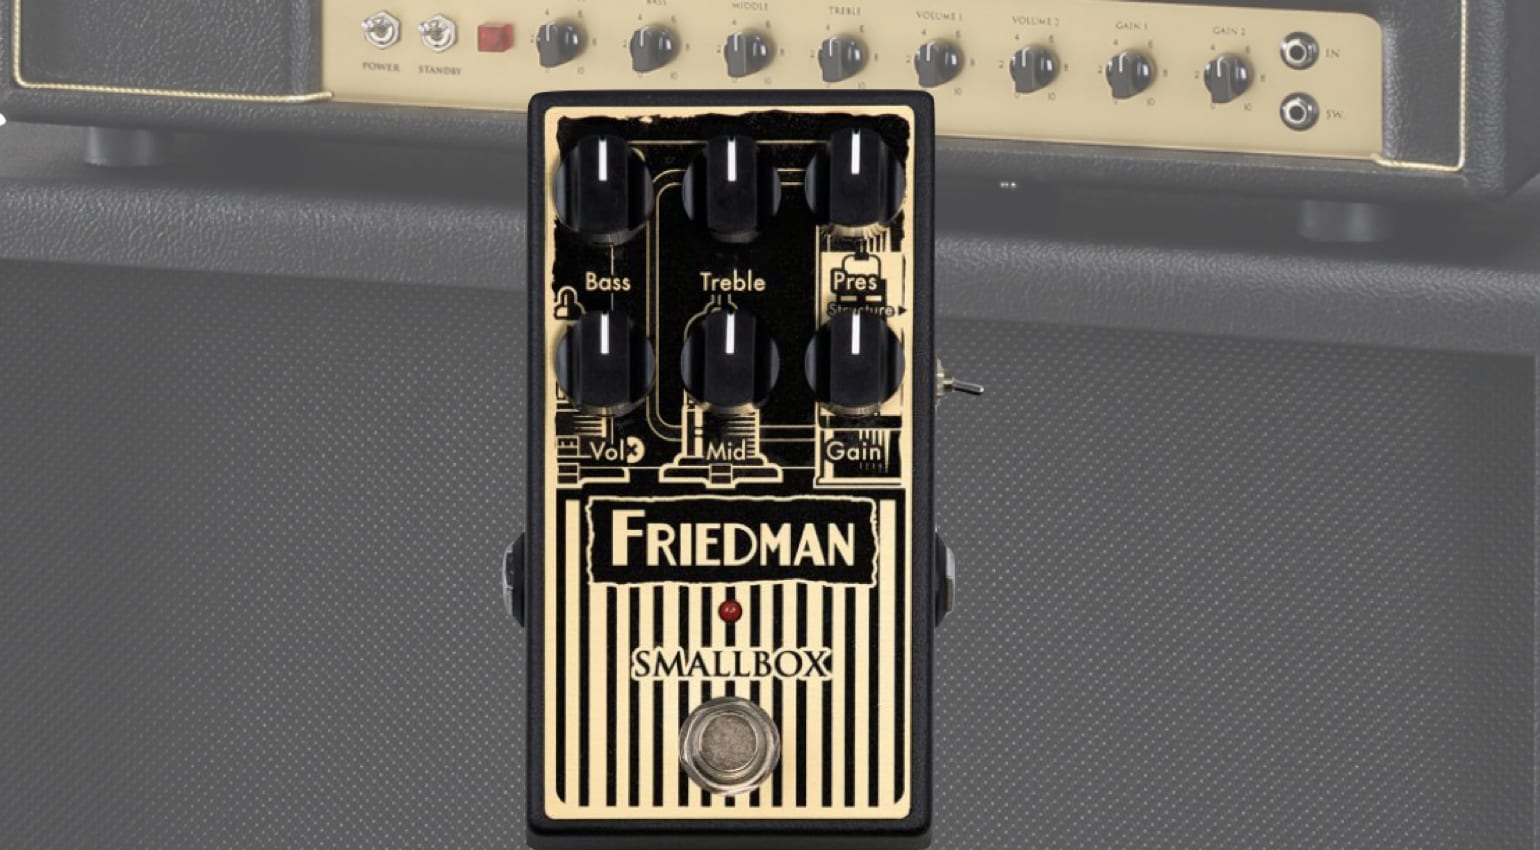 A Friedman Smallbox amp in a pedal? Yes please! - gearnews.com